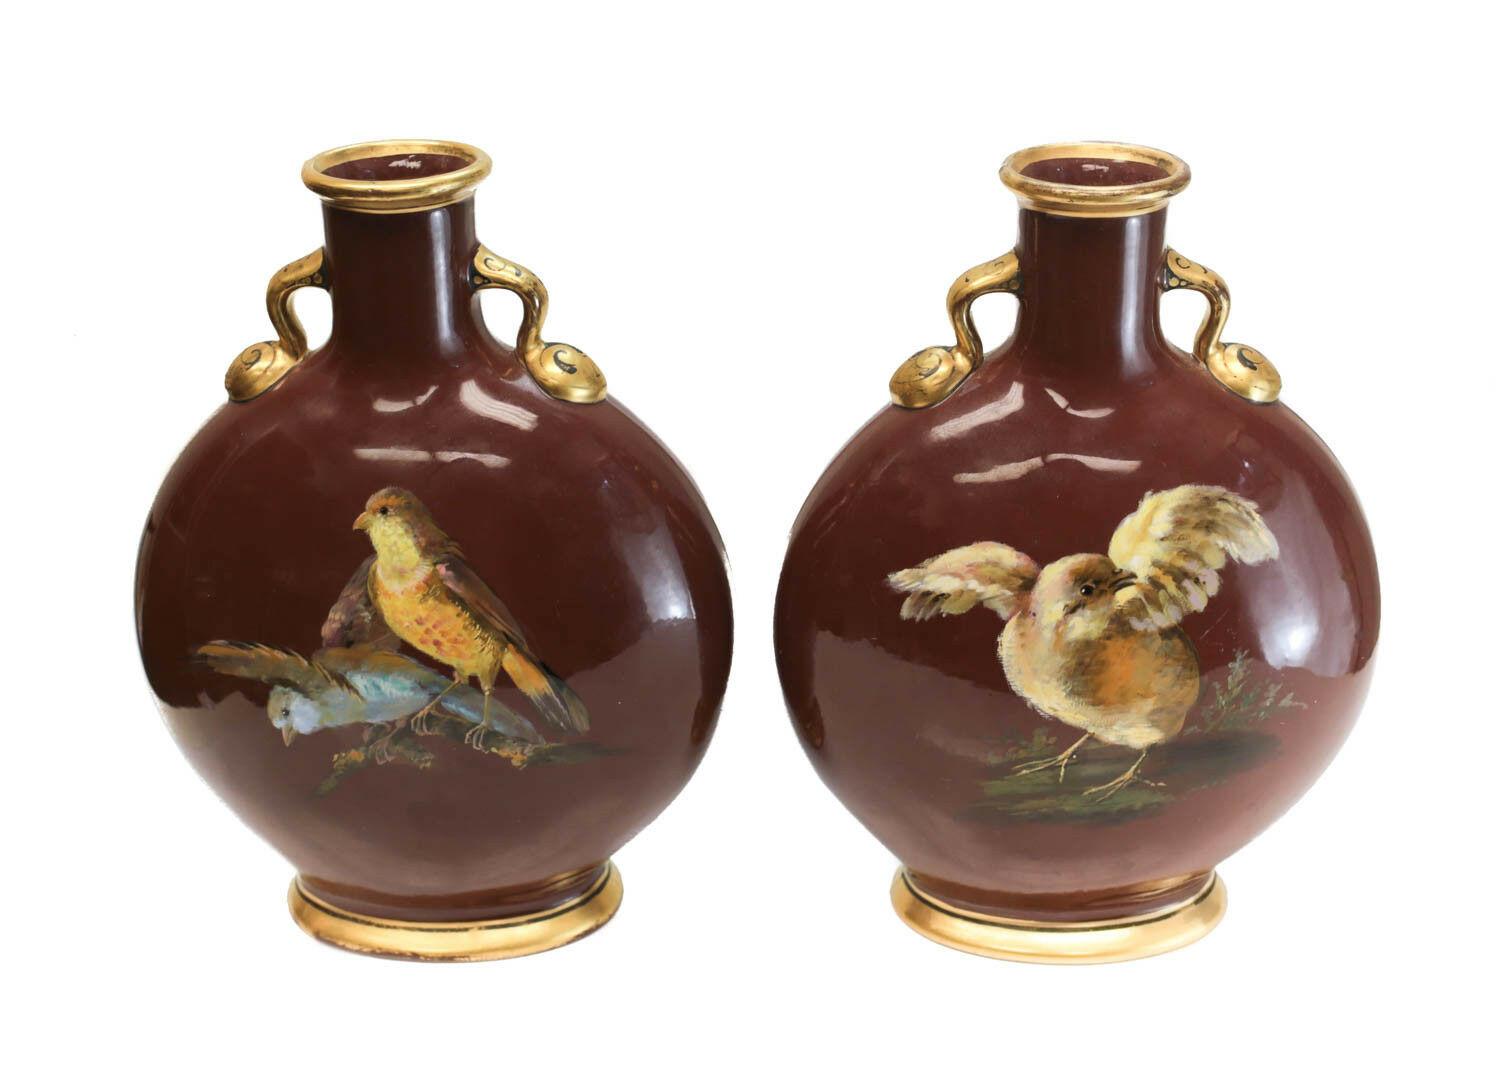 European Pair of Minton Porcelain Moon Flasks by William Mussill, 1871 For Sale